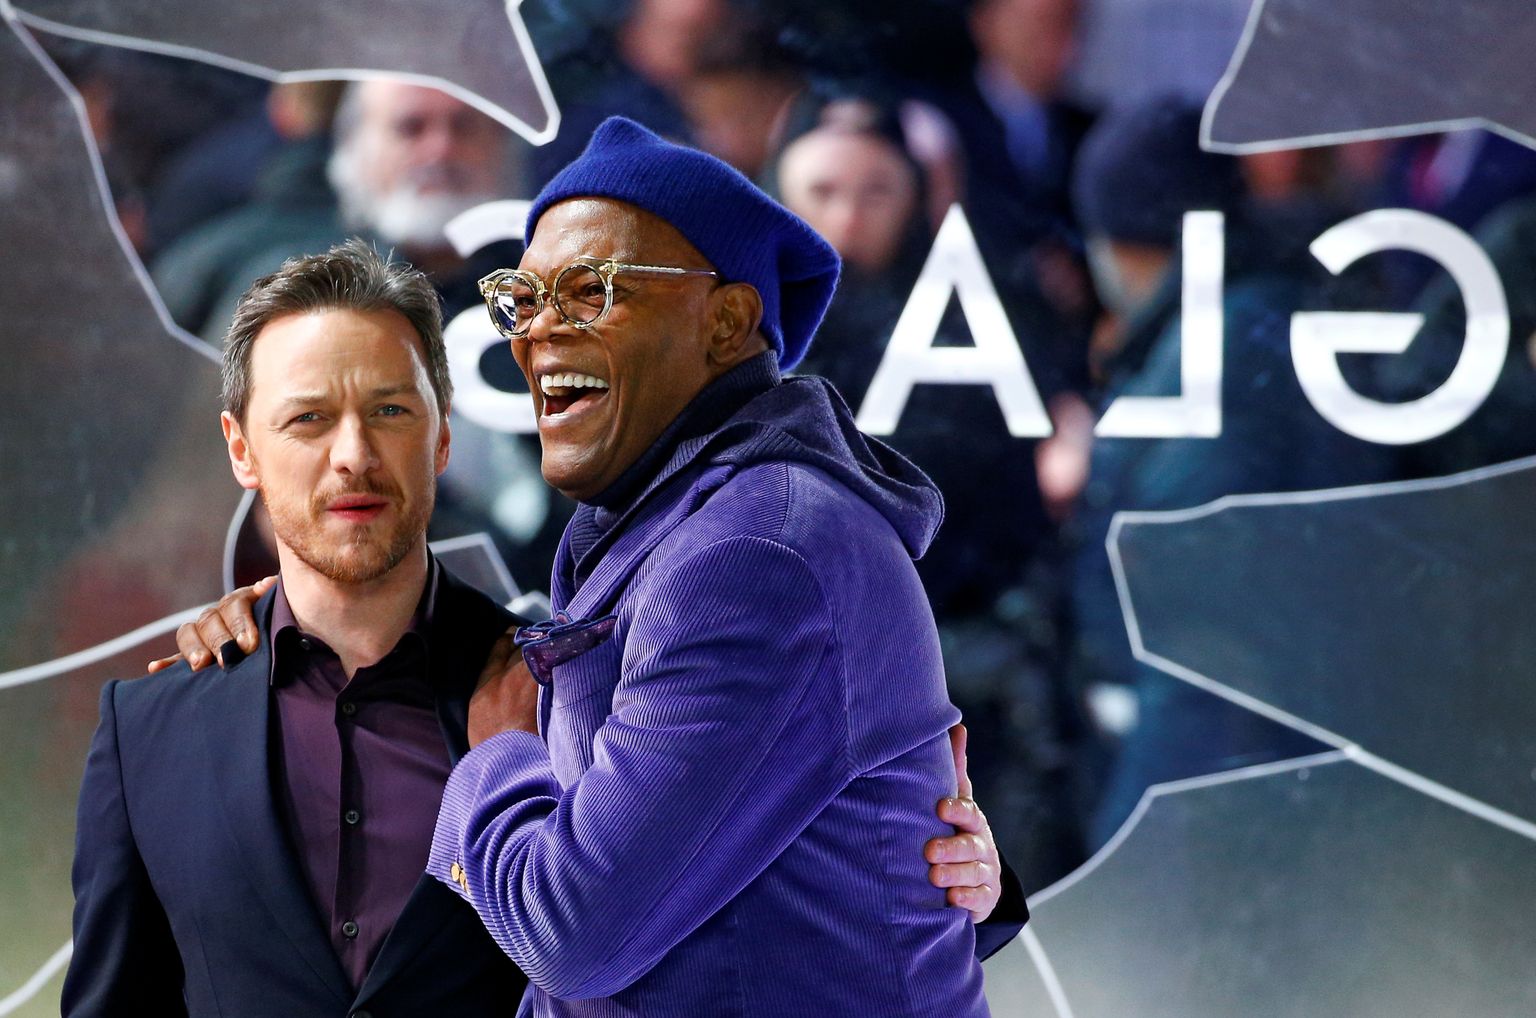 Actors Samuel L. Jackson and James McAvoy attend the European premiere of "Glass" in London, Britain January 9, 2019. REUTERS/Henry Nicholls